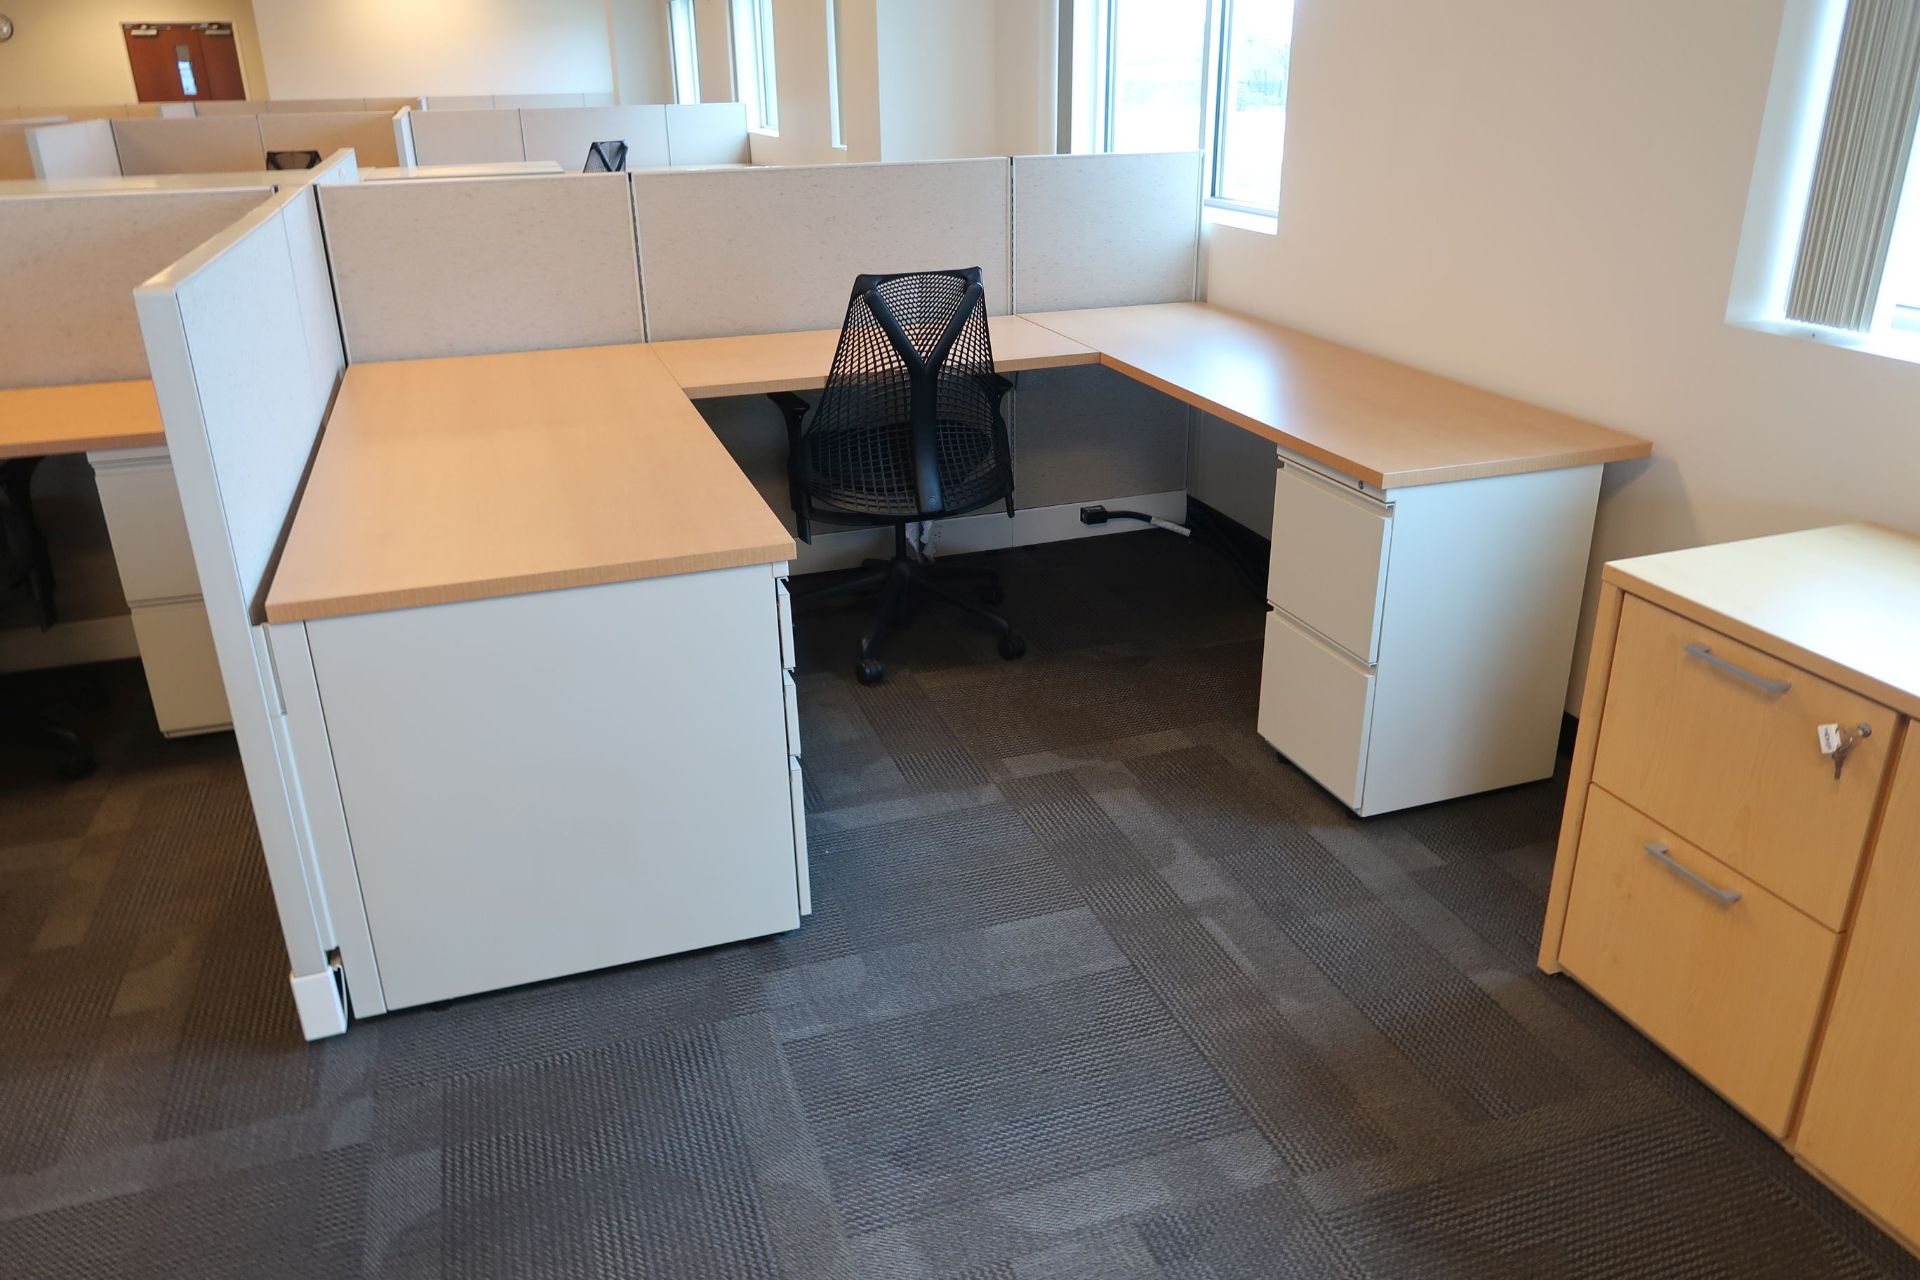 (LOT) 10-PERSON HERMAN MILLER CUBICLE SET 47" HIGH WALLS WITH CHAIRS - Image 11 of 11